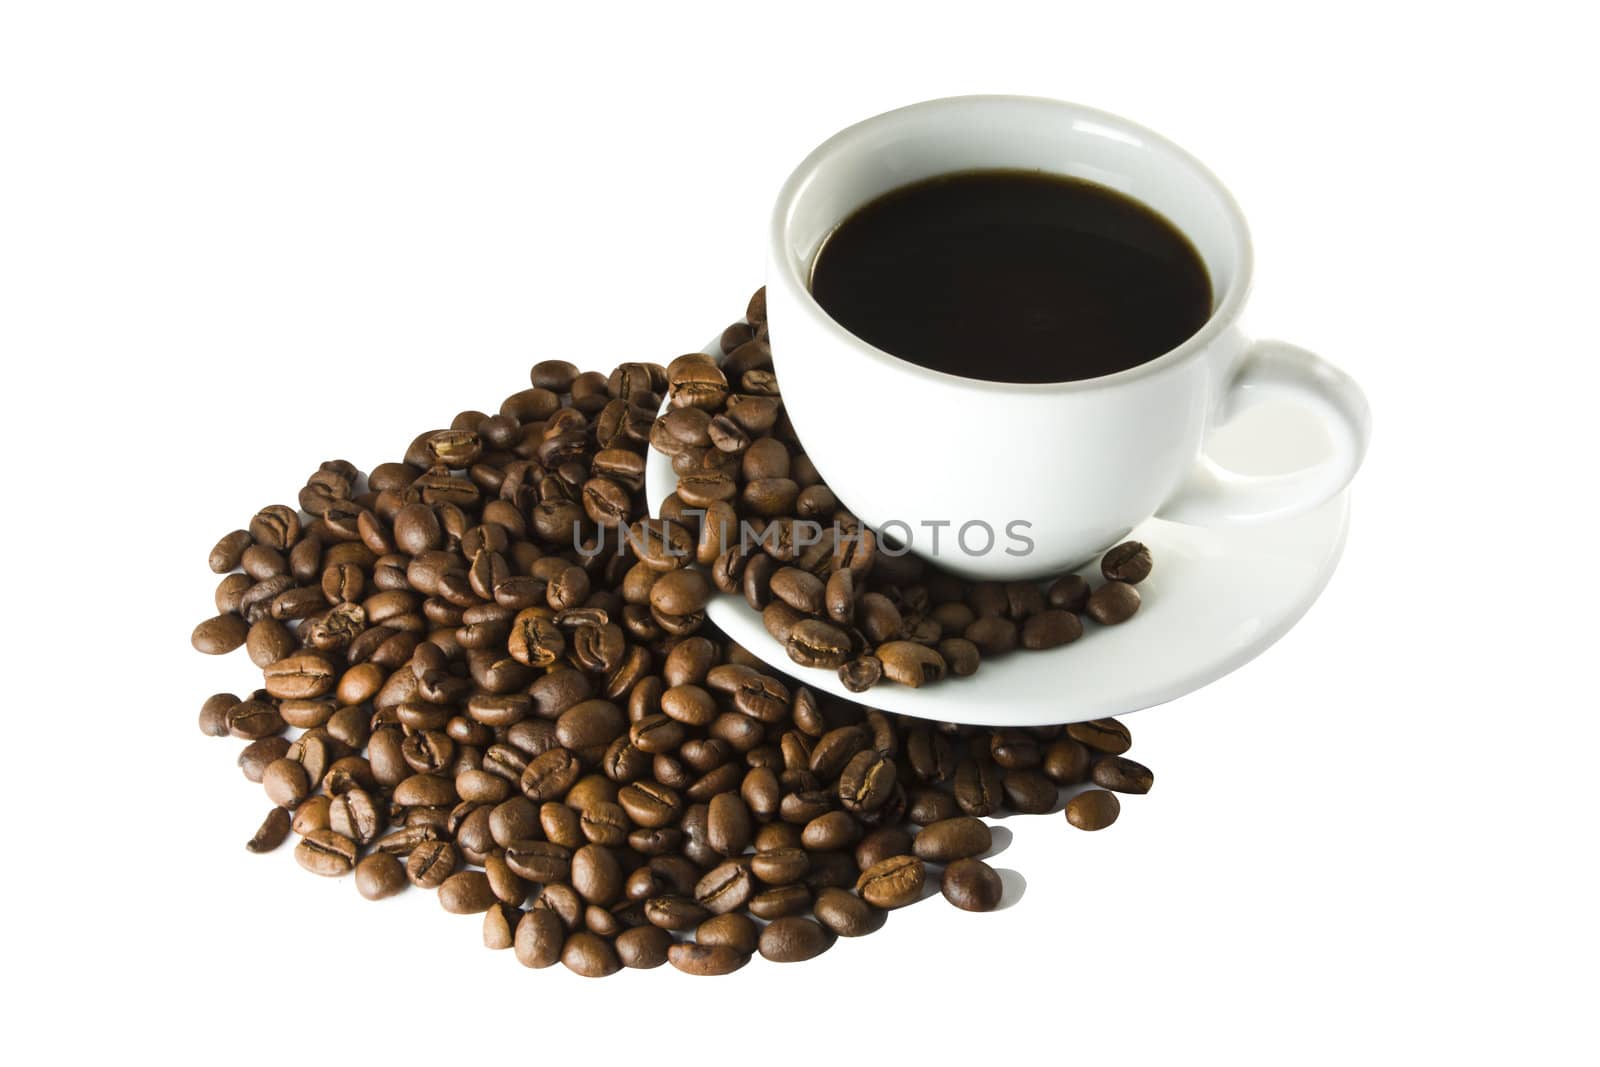 The cup of coffee and beans